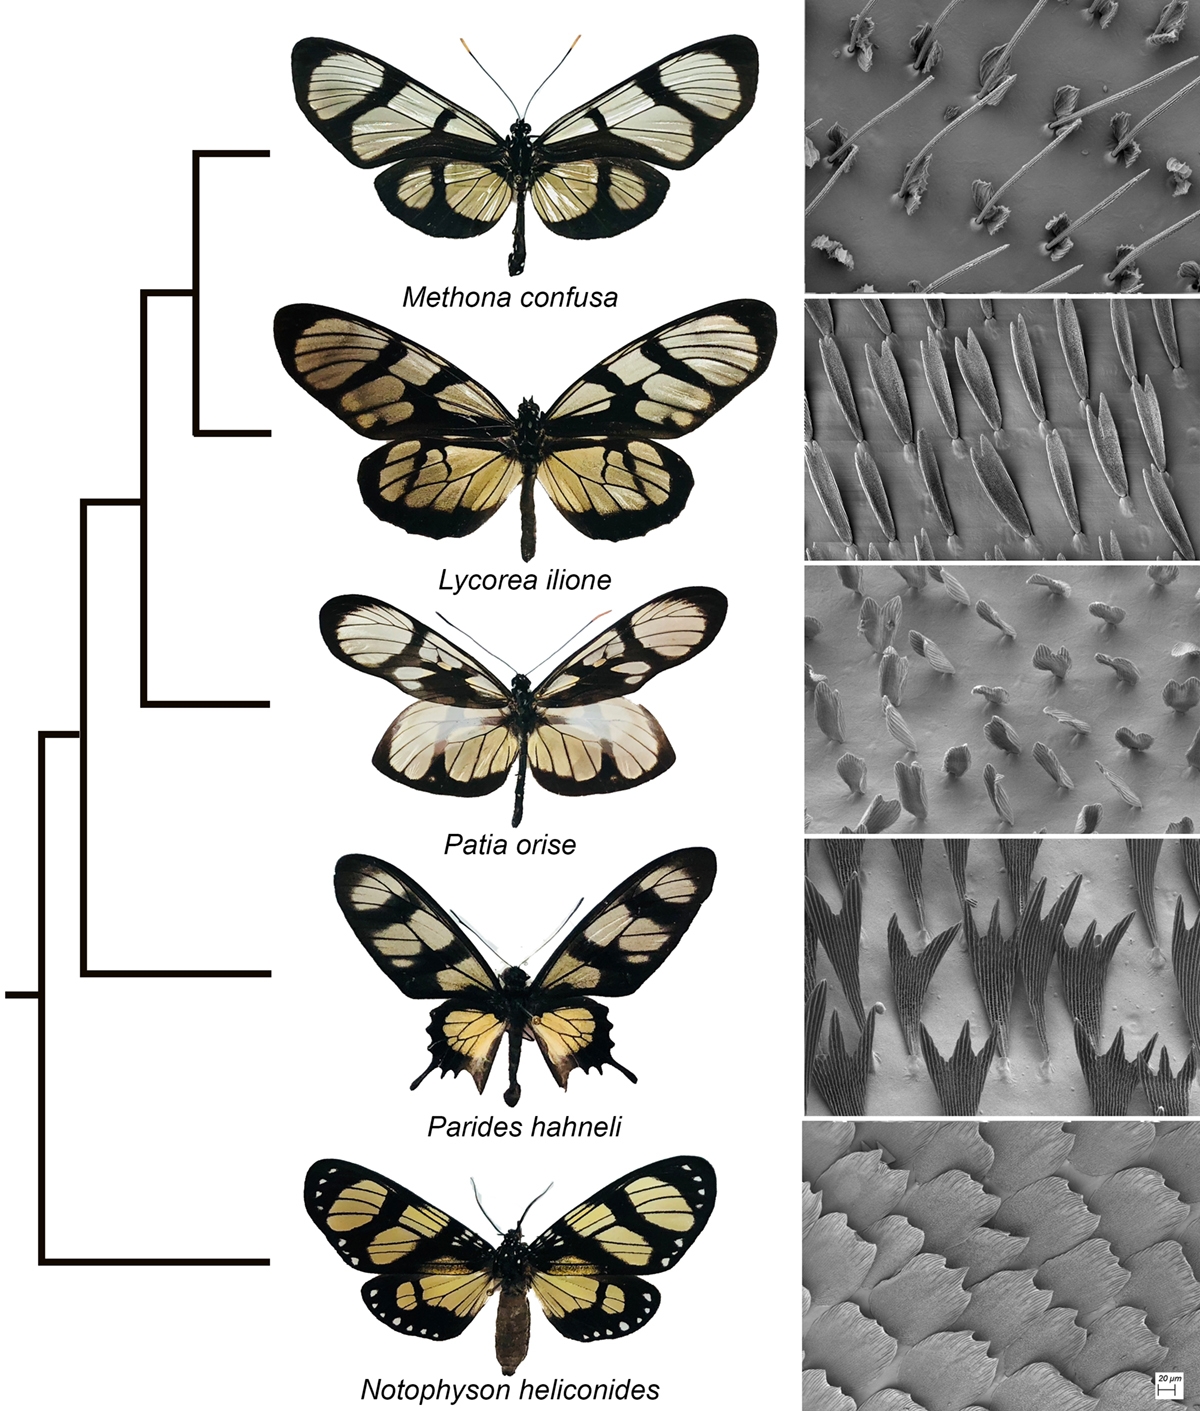 distantly related species of butterflies